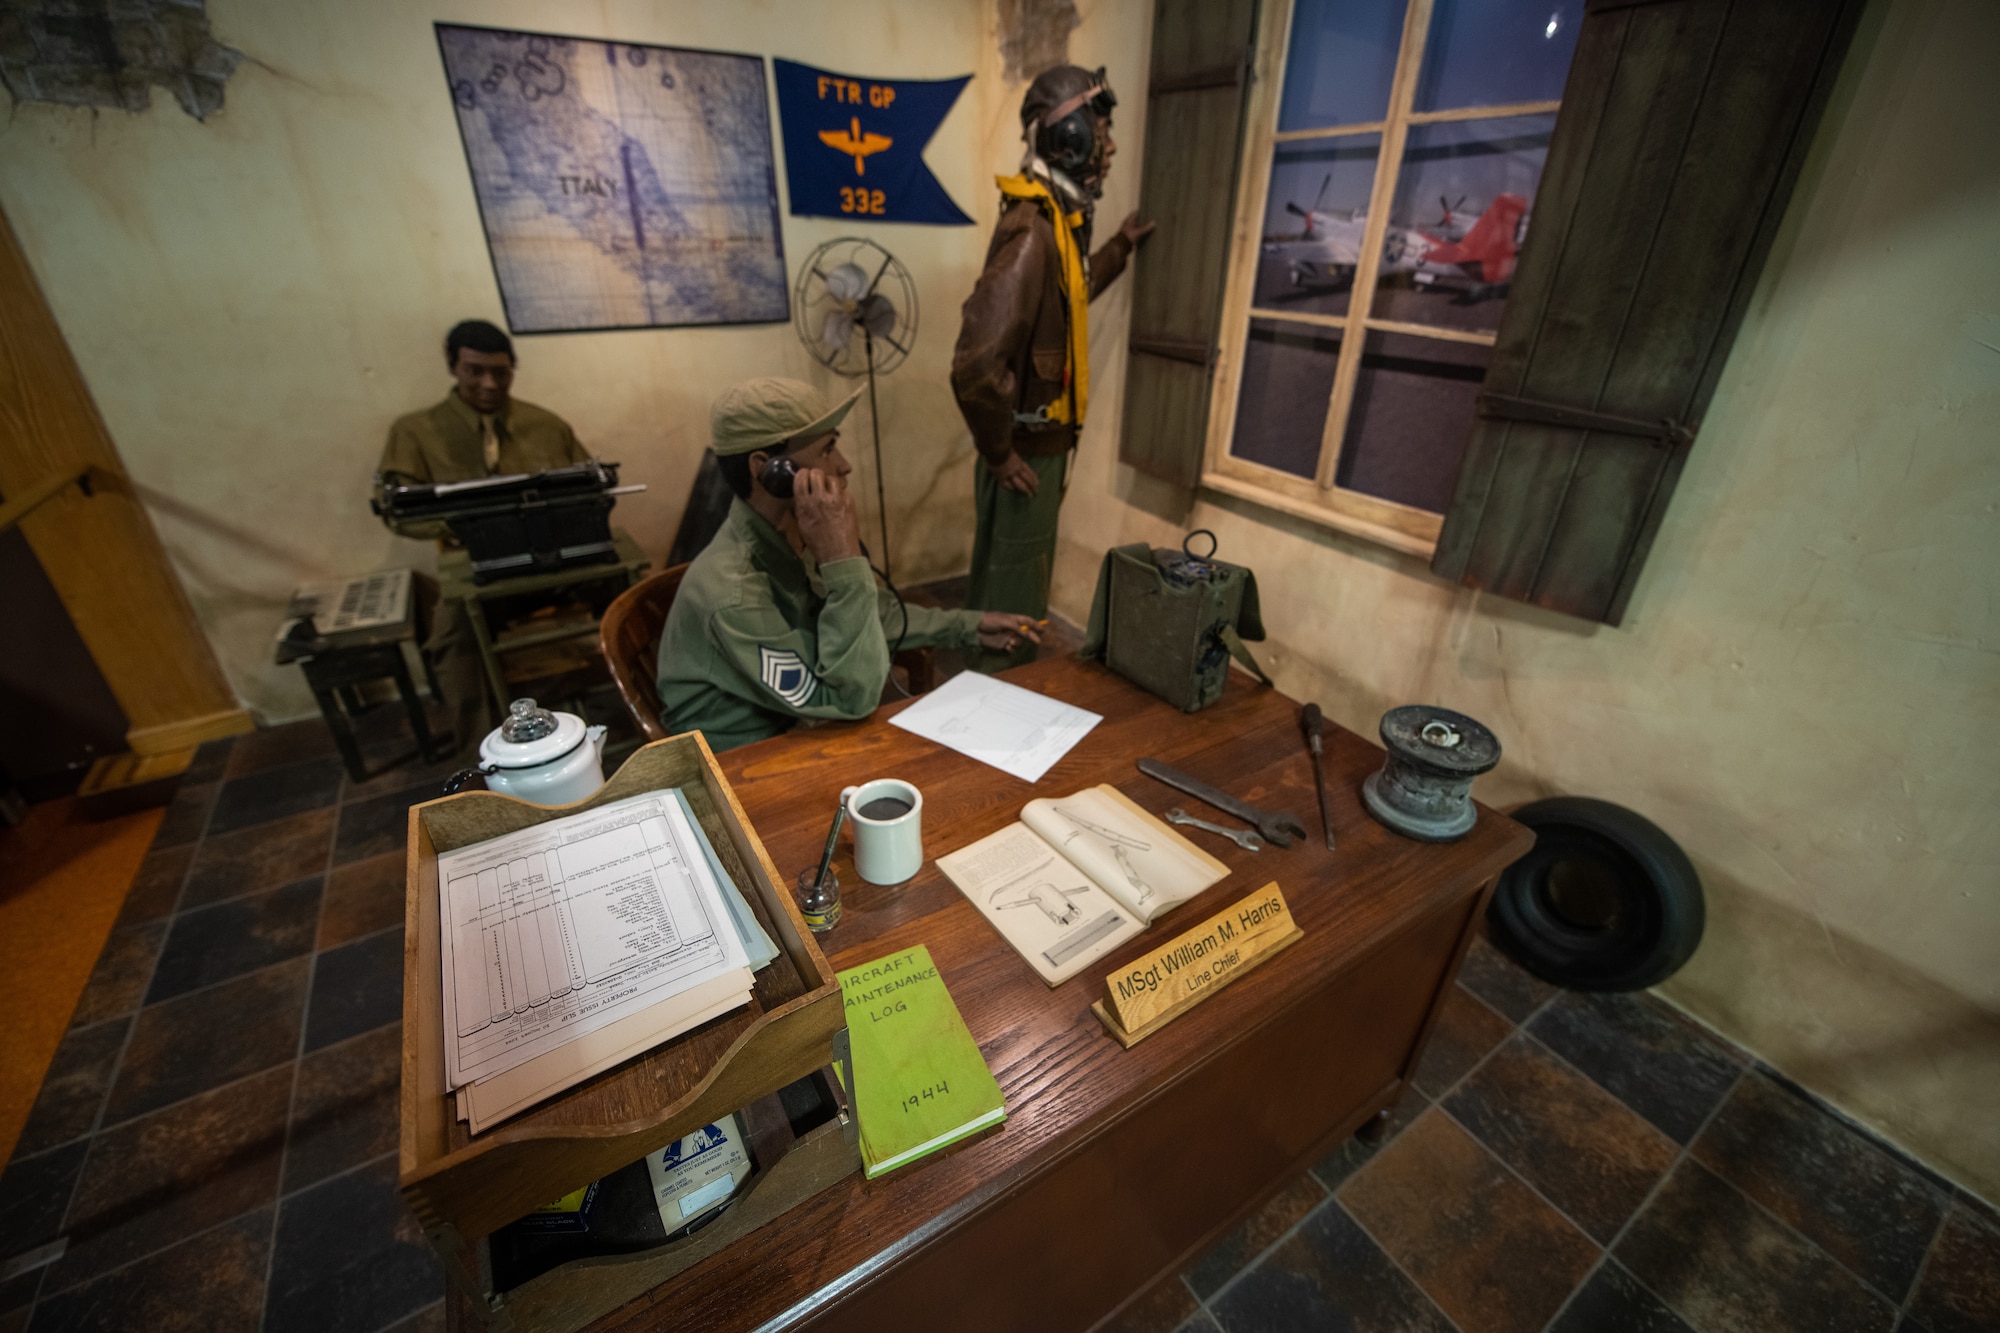 Artifacts from the Tuskegee Airman exhibit are displayed for visitors to view in the USAF Airman Heritage Training Complex, Aug. 10, at Joint Base San Antonio-Lackland, Texas.